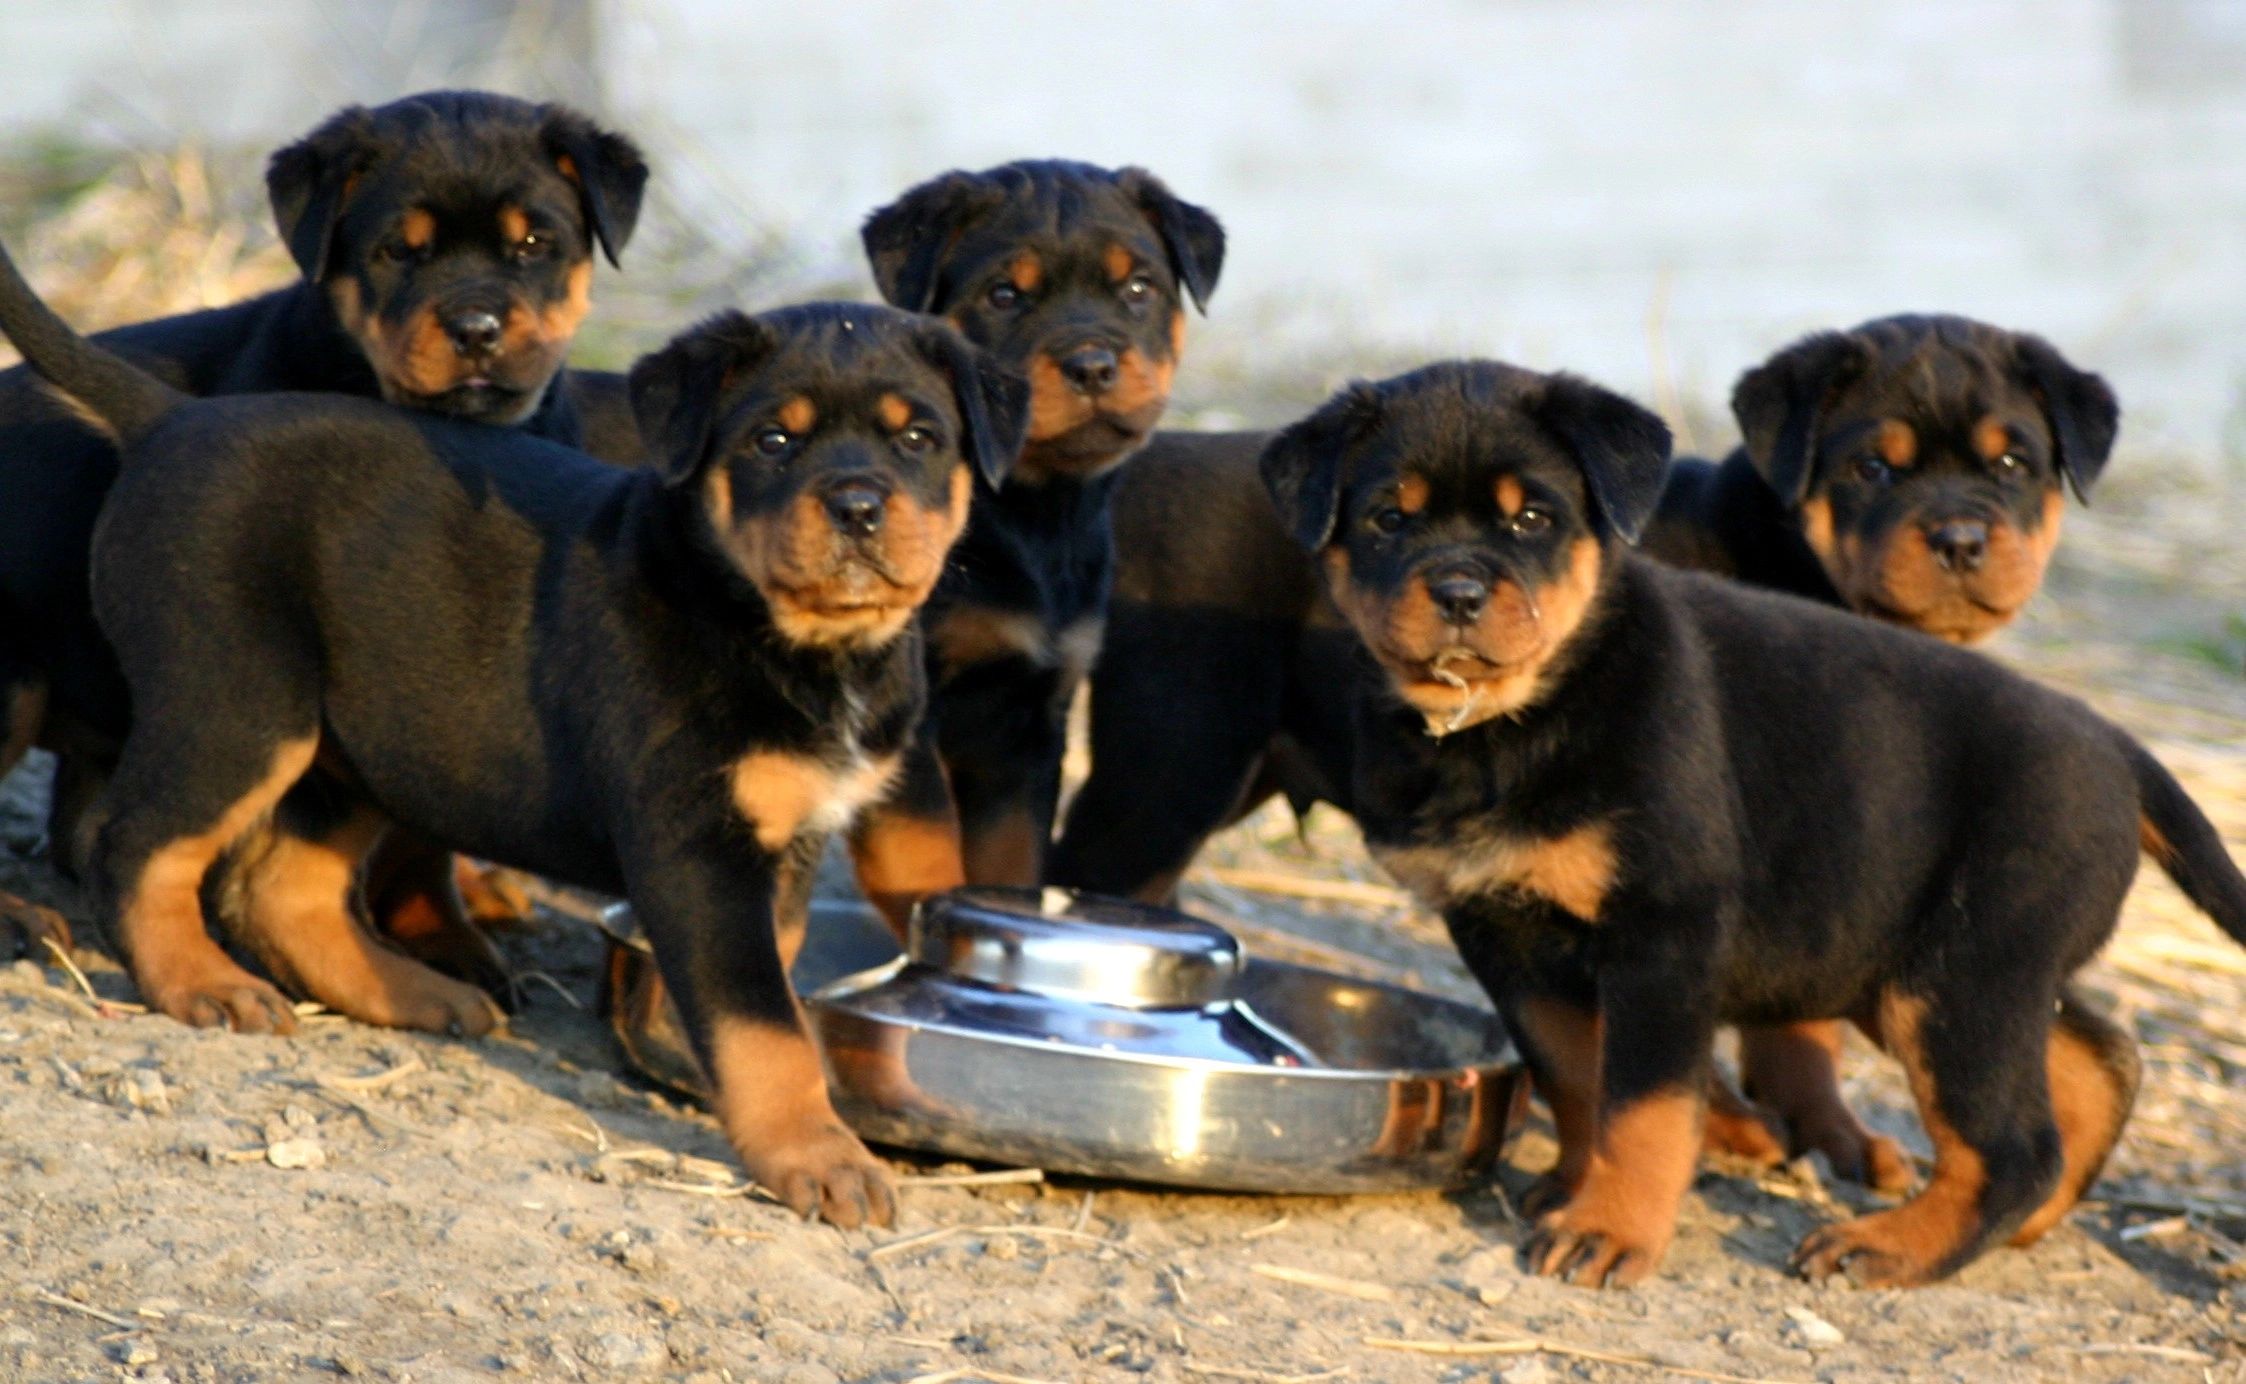 when can a rottweiler have puppies?